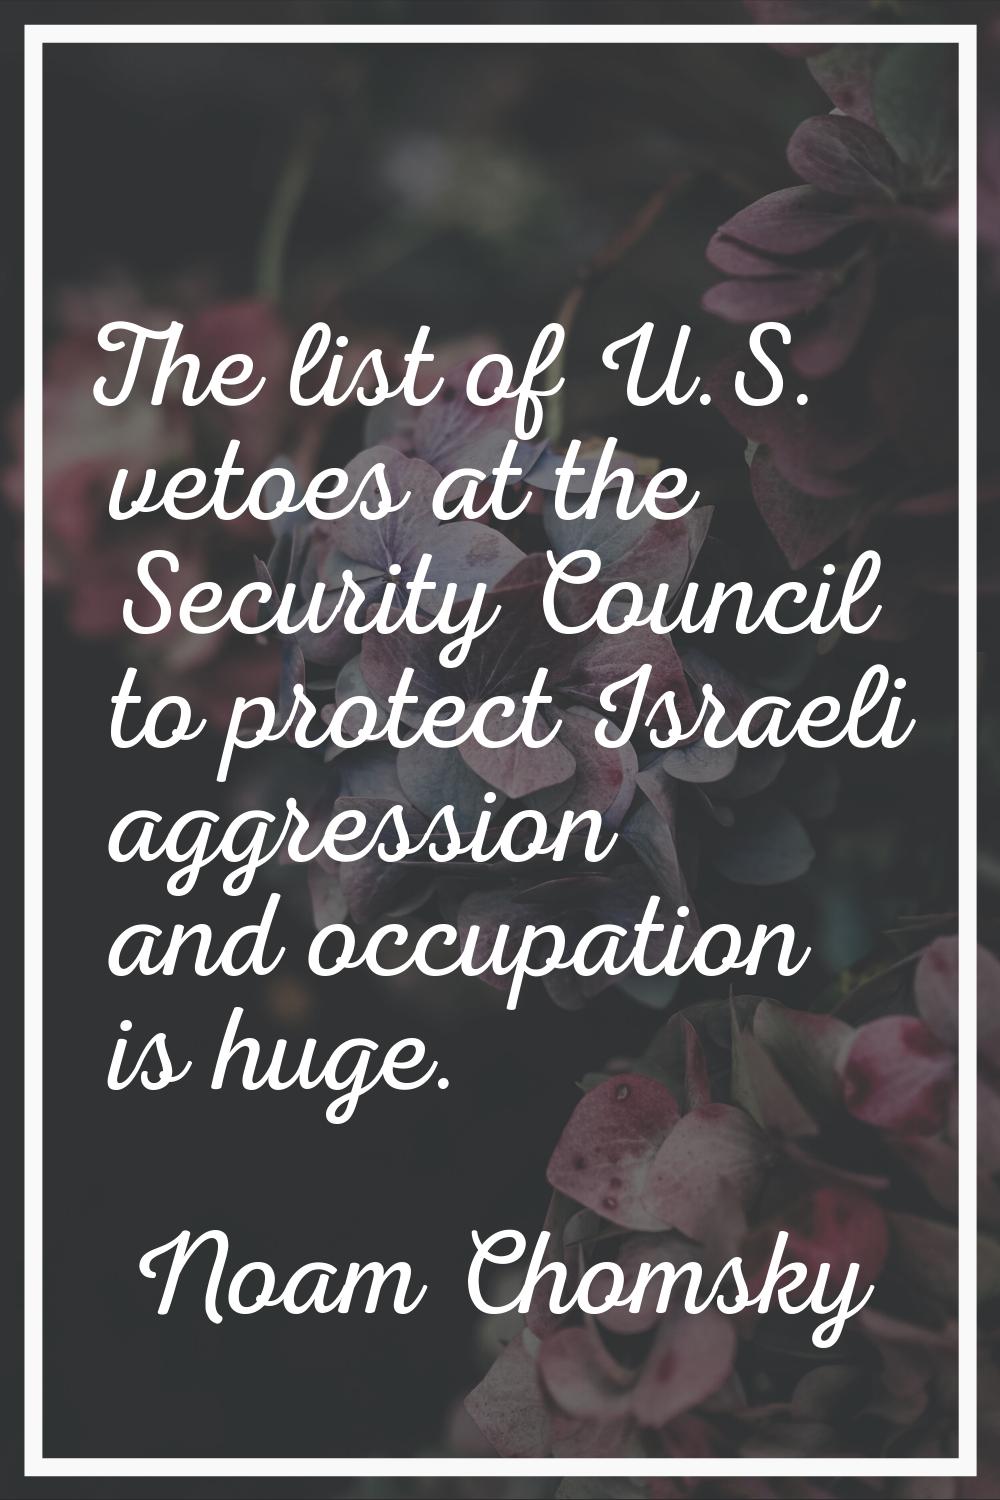 The list of U.S. vetoes at the Security Council to protect Israeli aggression and occupation is hug